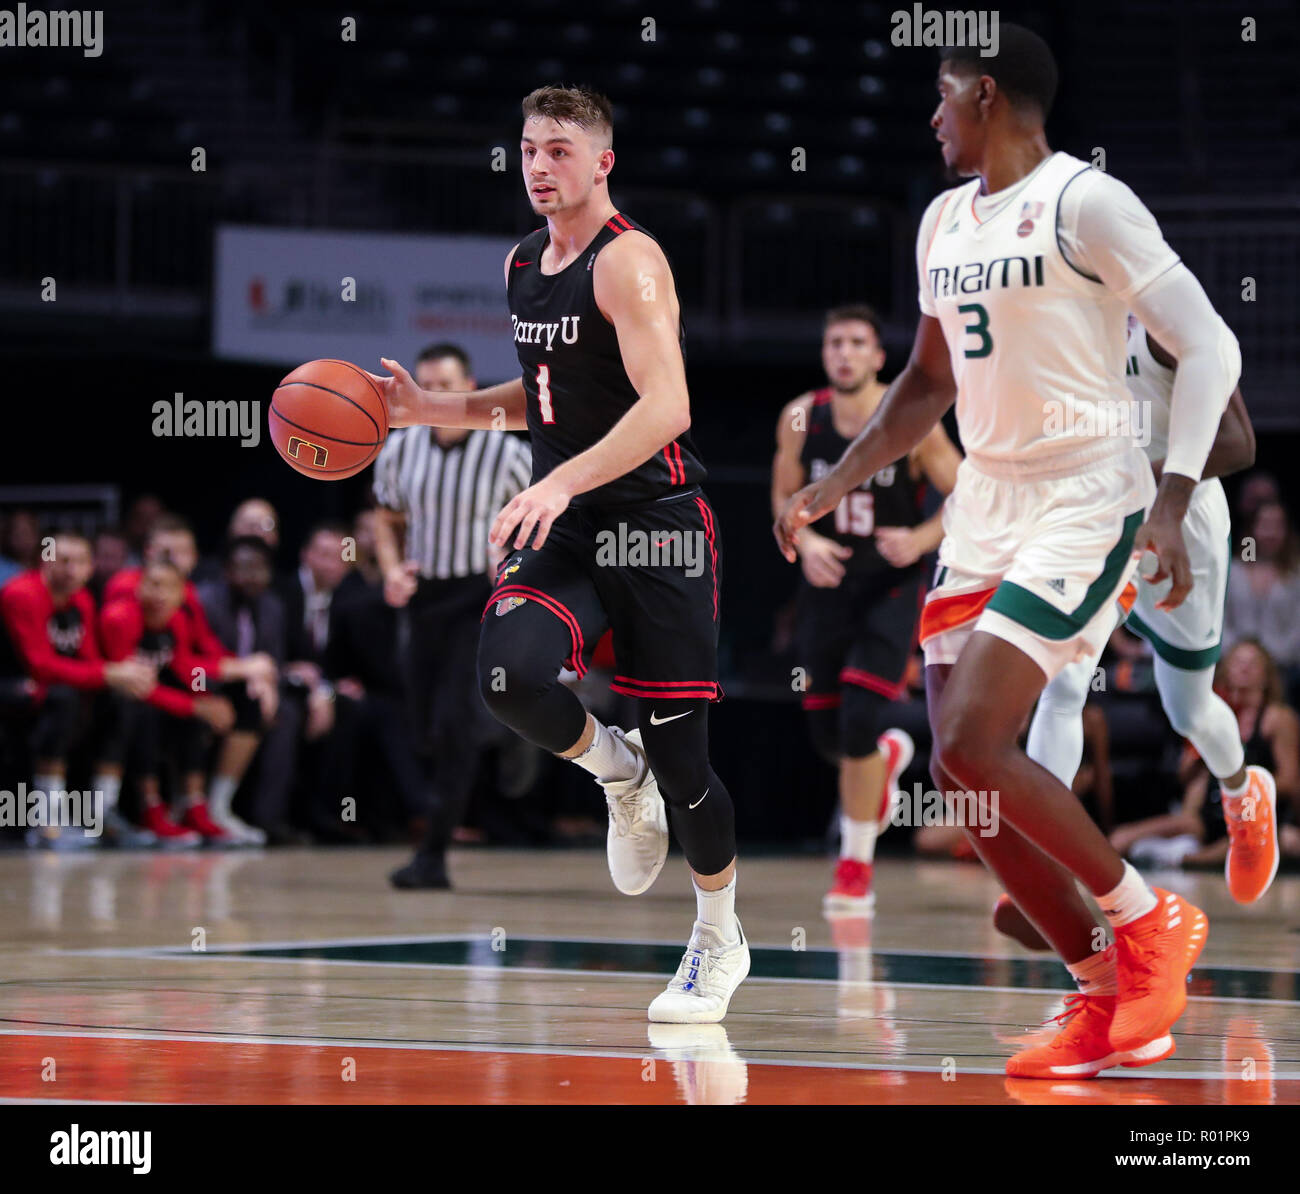 Coral Gables, Florida, USA. 30th Oct, 2018. Barry Buccaneers guard/forward  Evan Walshe (1) in action during the NCAA men's basketball exhibition game  between the Barry Buccaneers and the Miami Hurricanes at the